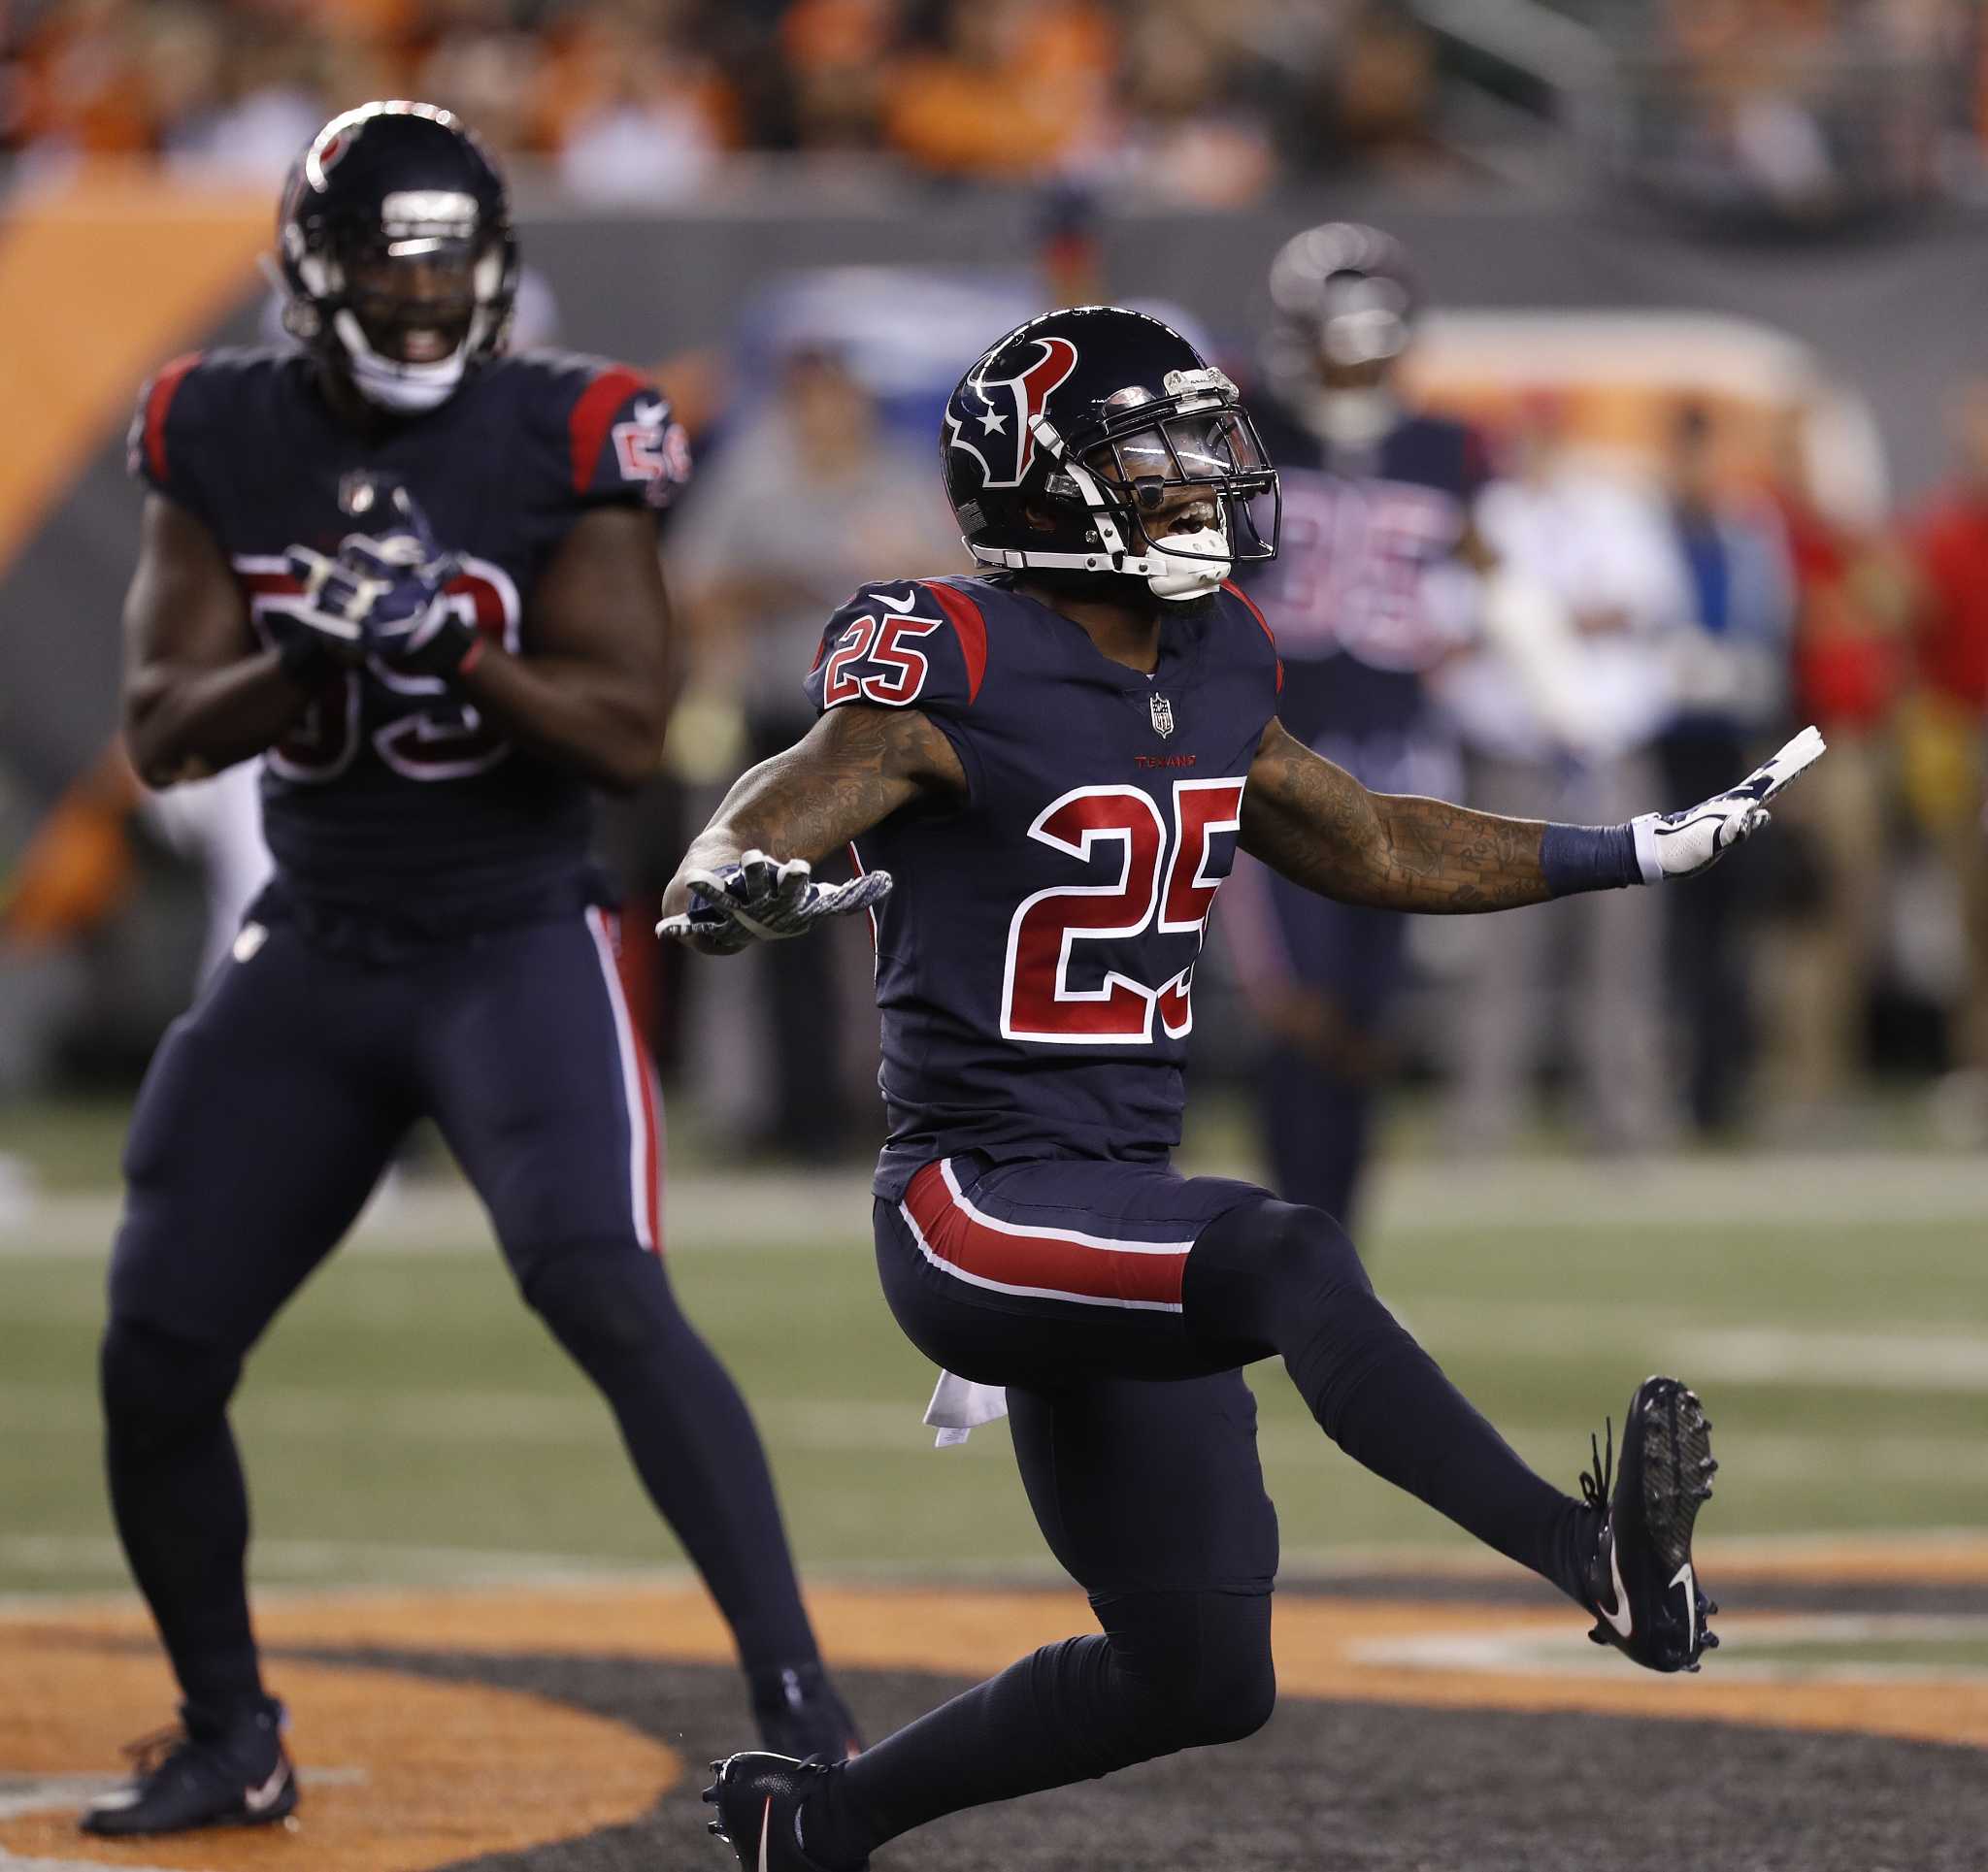 NFL permits Texans to wear color rush uniforms three times in 2018